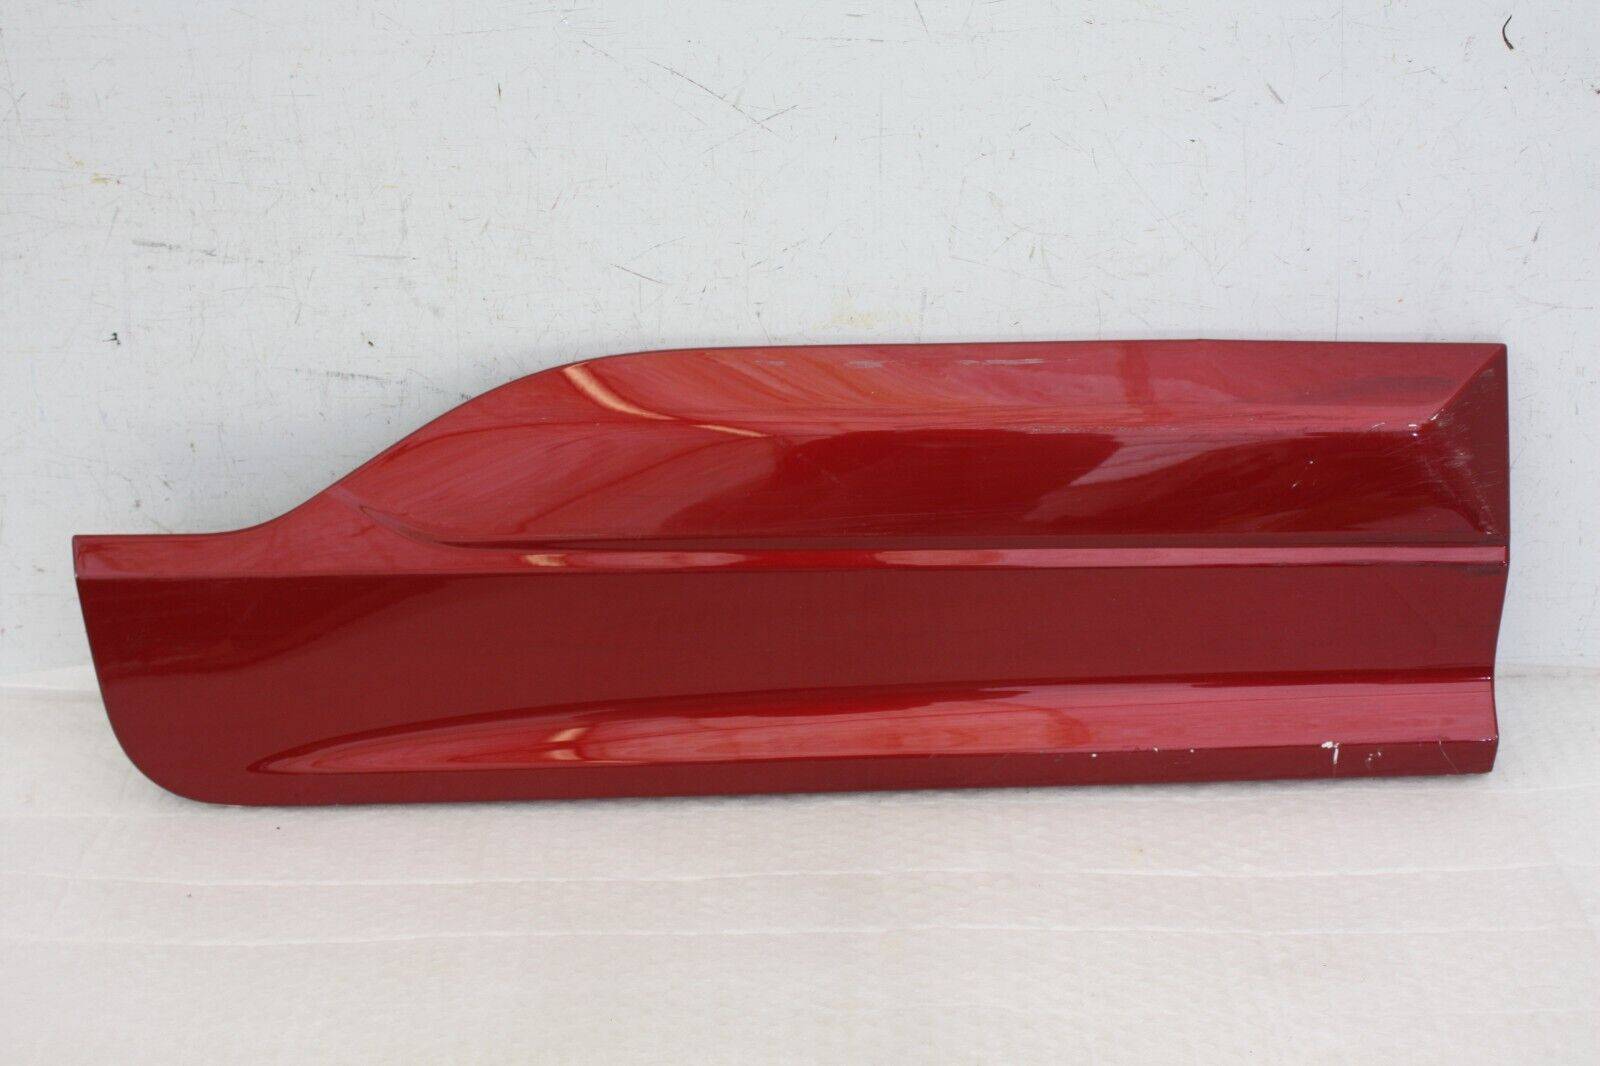 Ford Kuga Rear Right Side Door Moulding 2020 TO 2023 LV4B S25334 C Genuine 176319902737